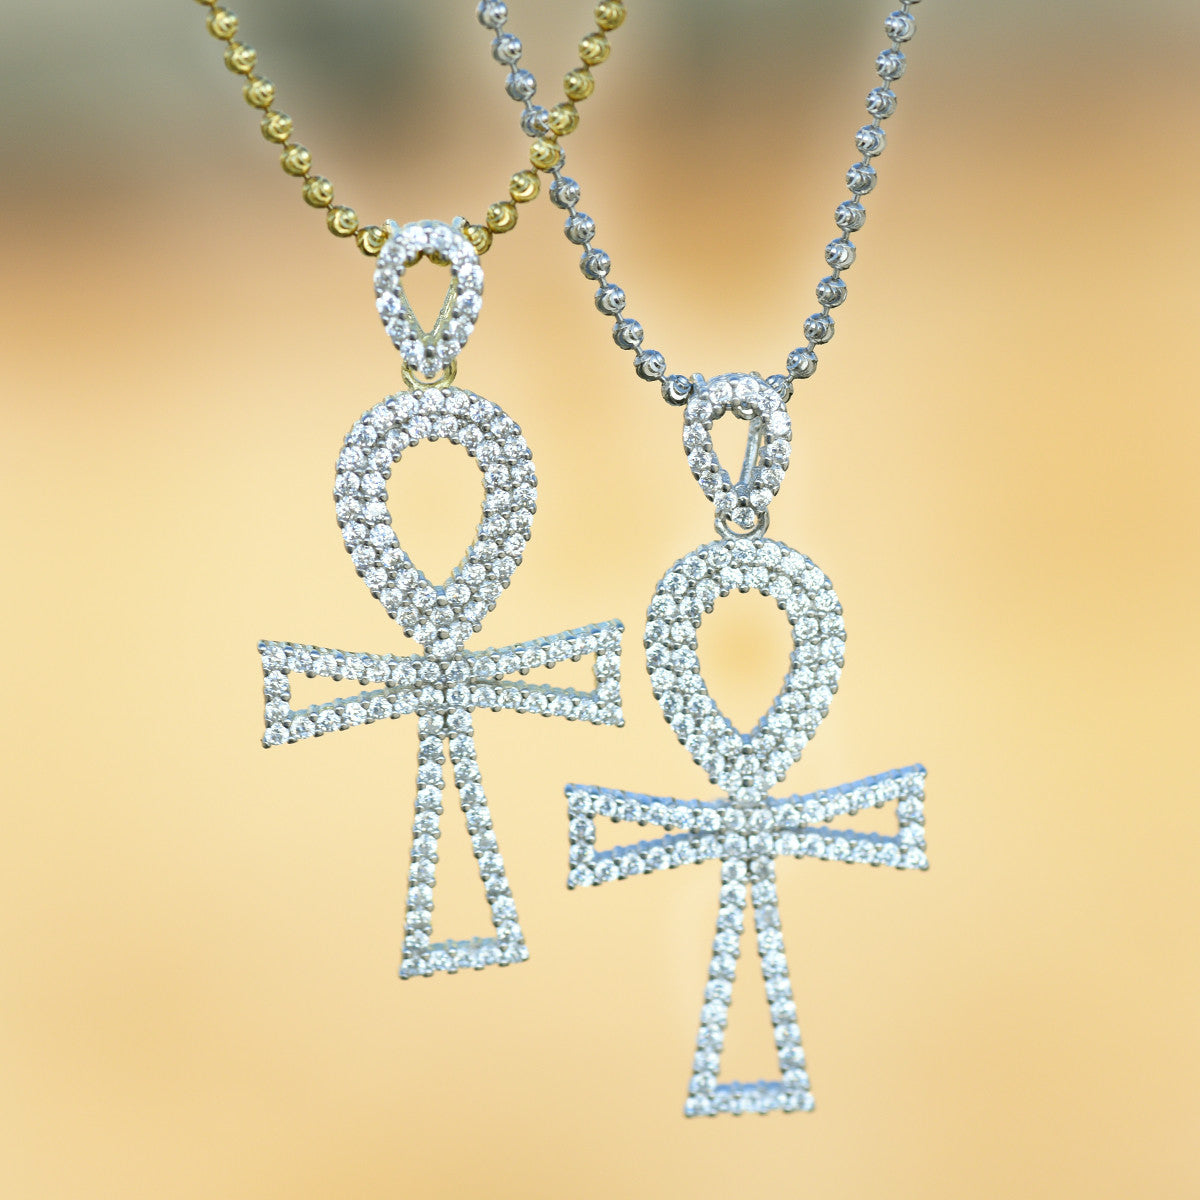 Silver Ankh Cross Pendant With Moon Cut Chain